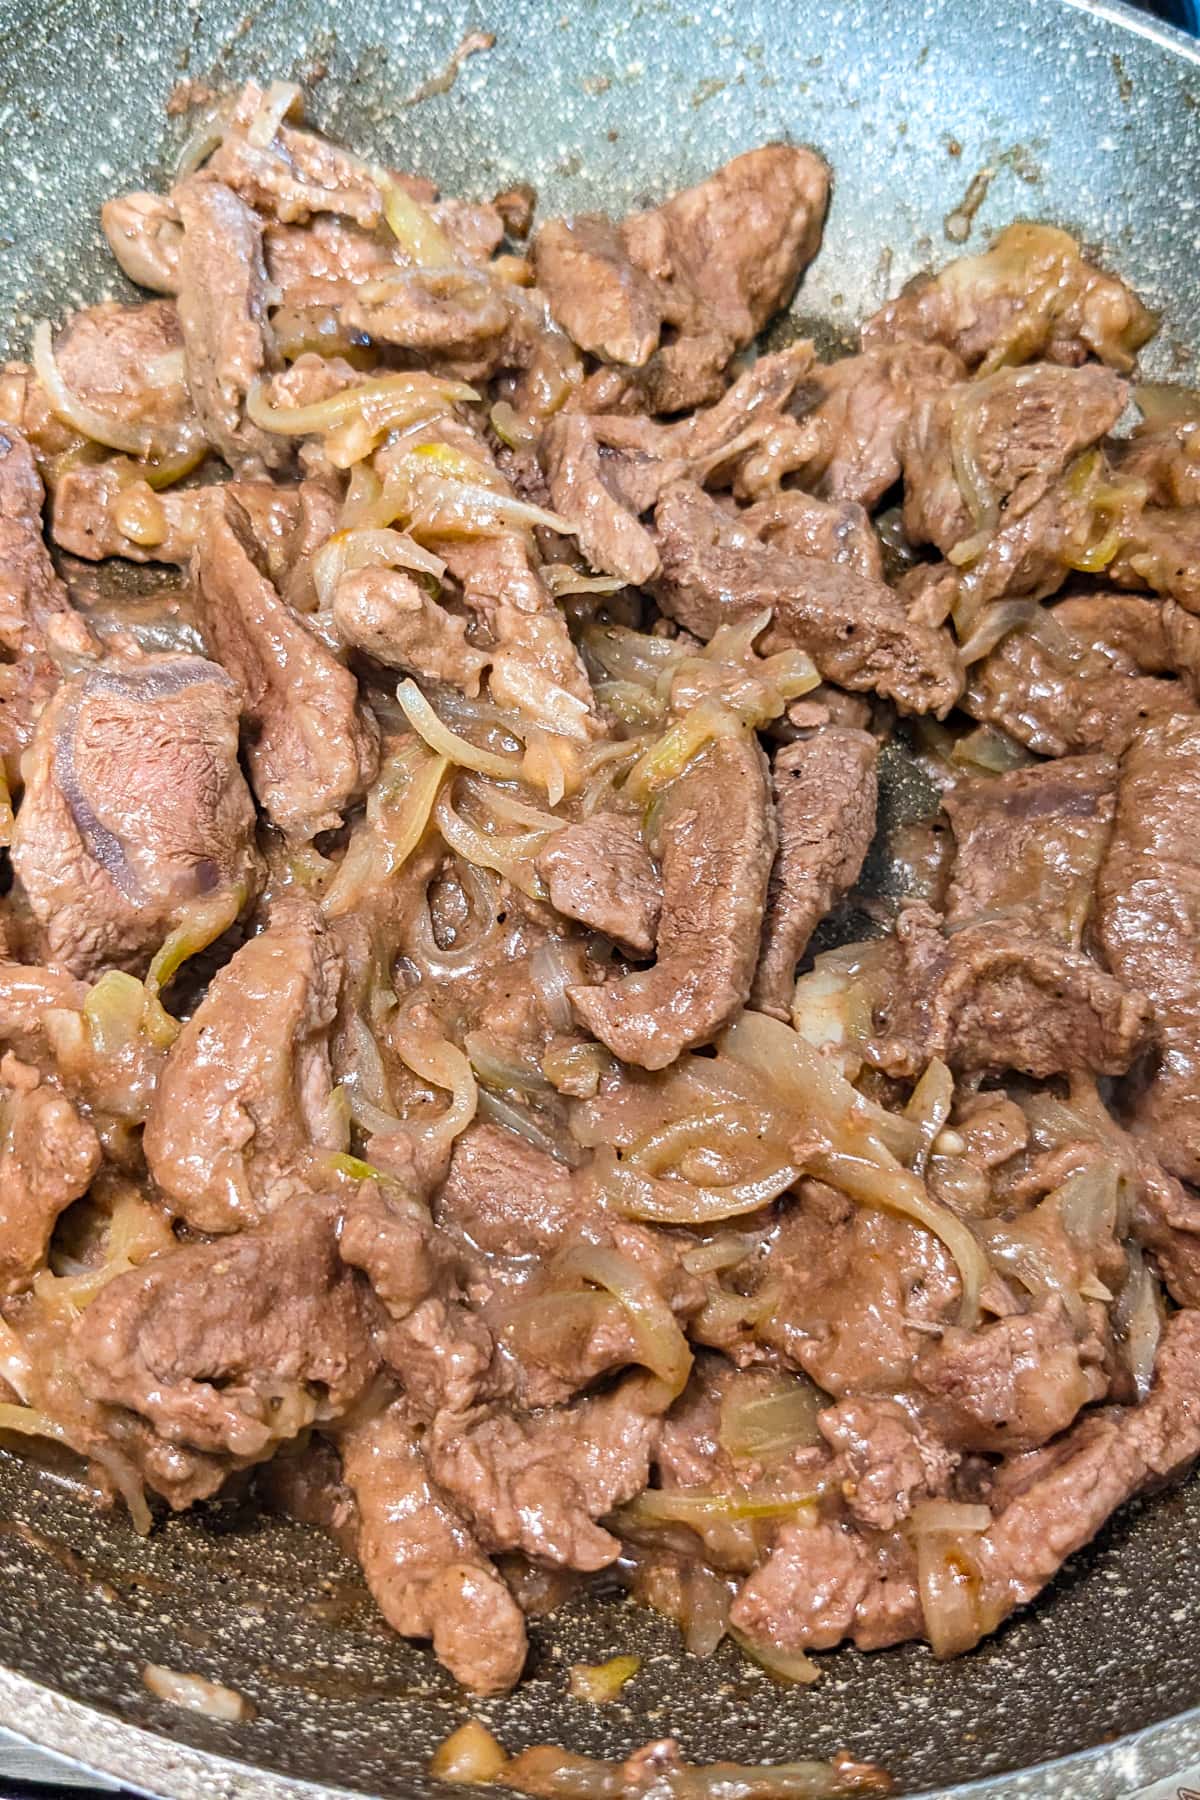 Slices of beef meat mixed with chopped onions.